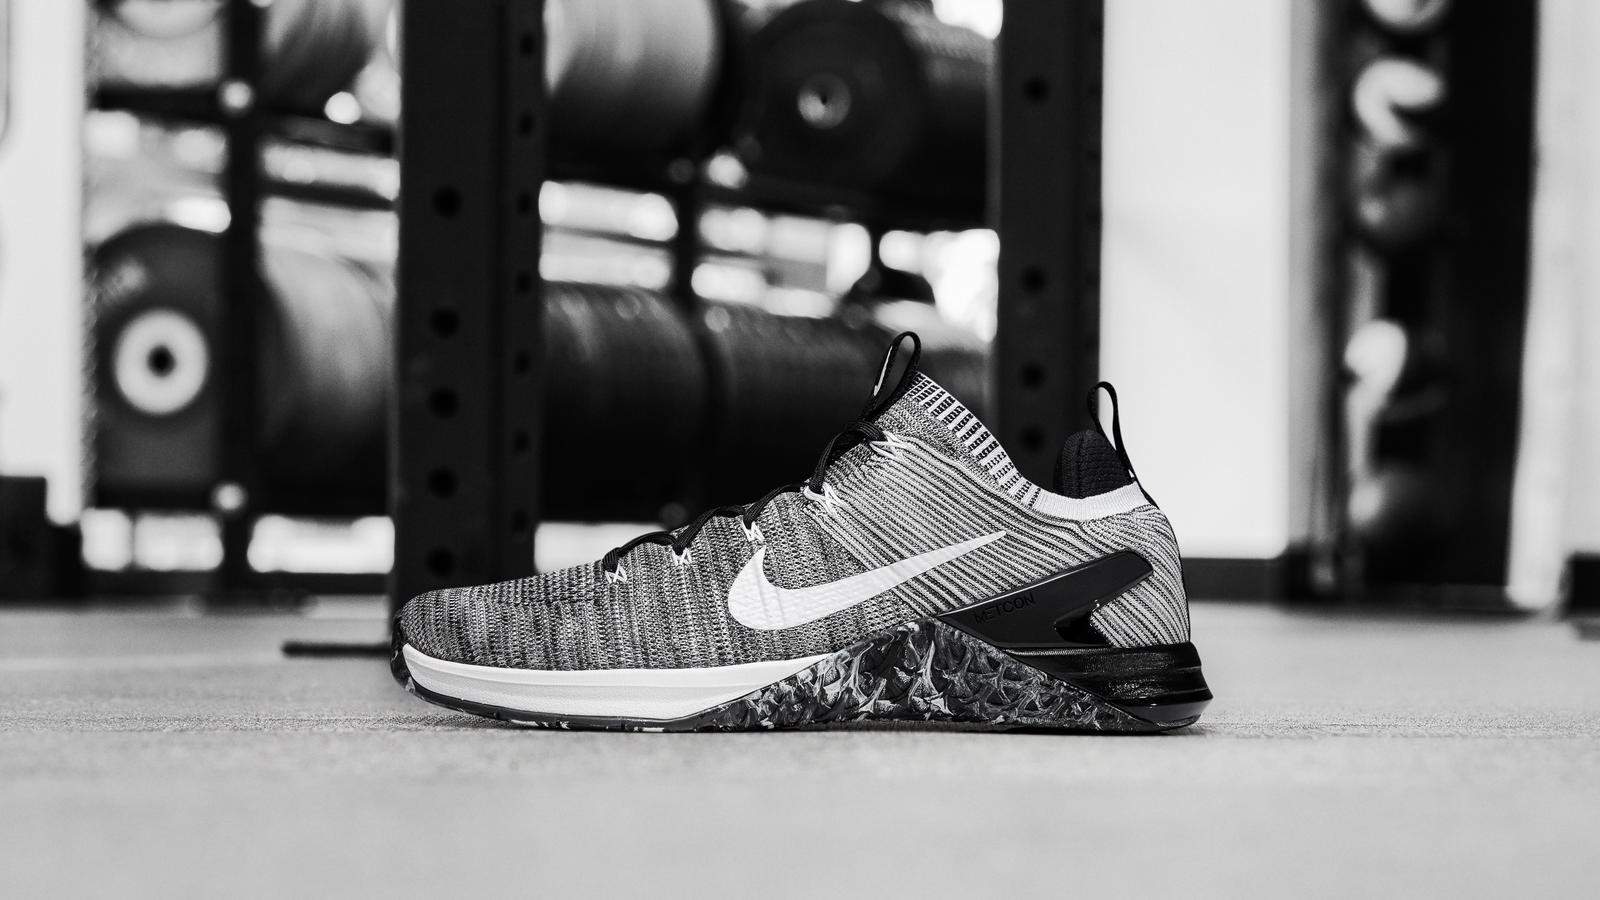 Tormento Caballo Consulta The Nike Metcon DSX Flyknit 2 Sheds Weight for December - WearTesters